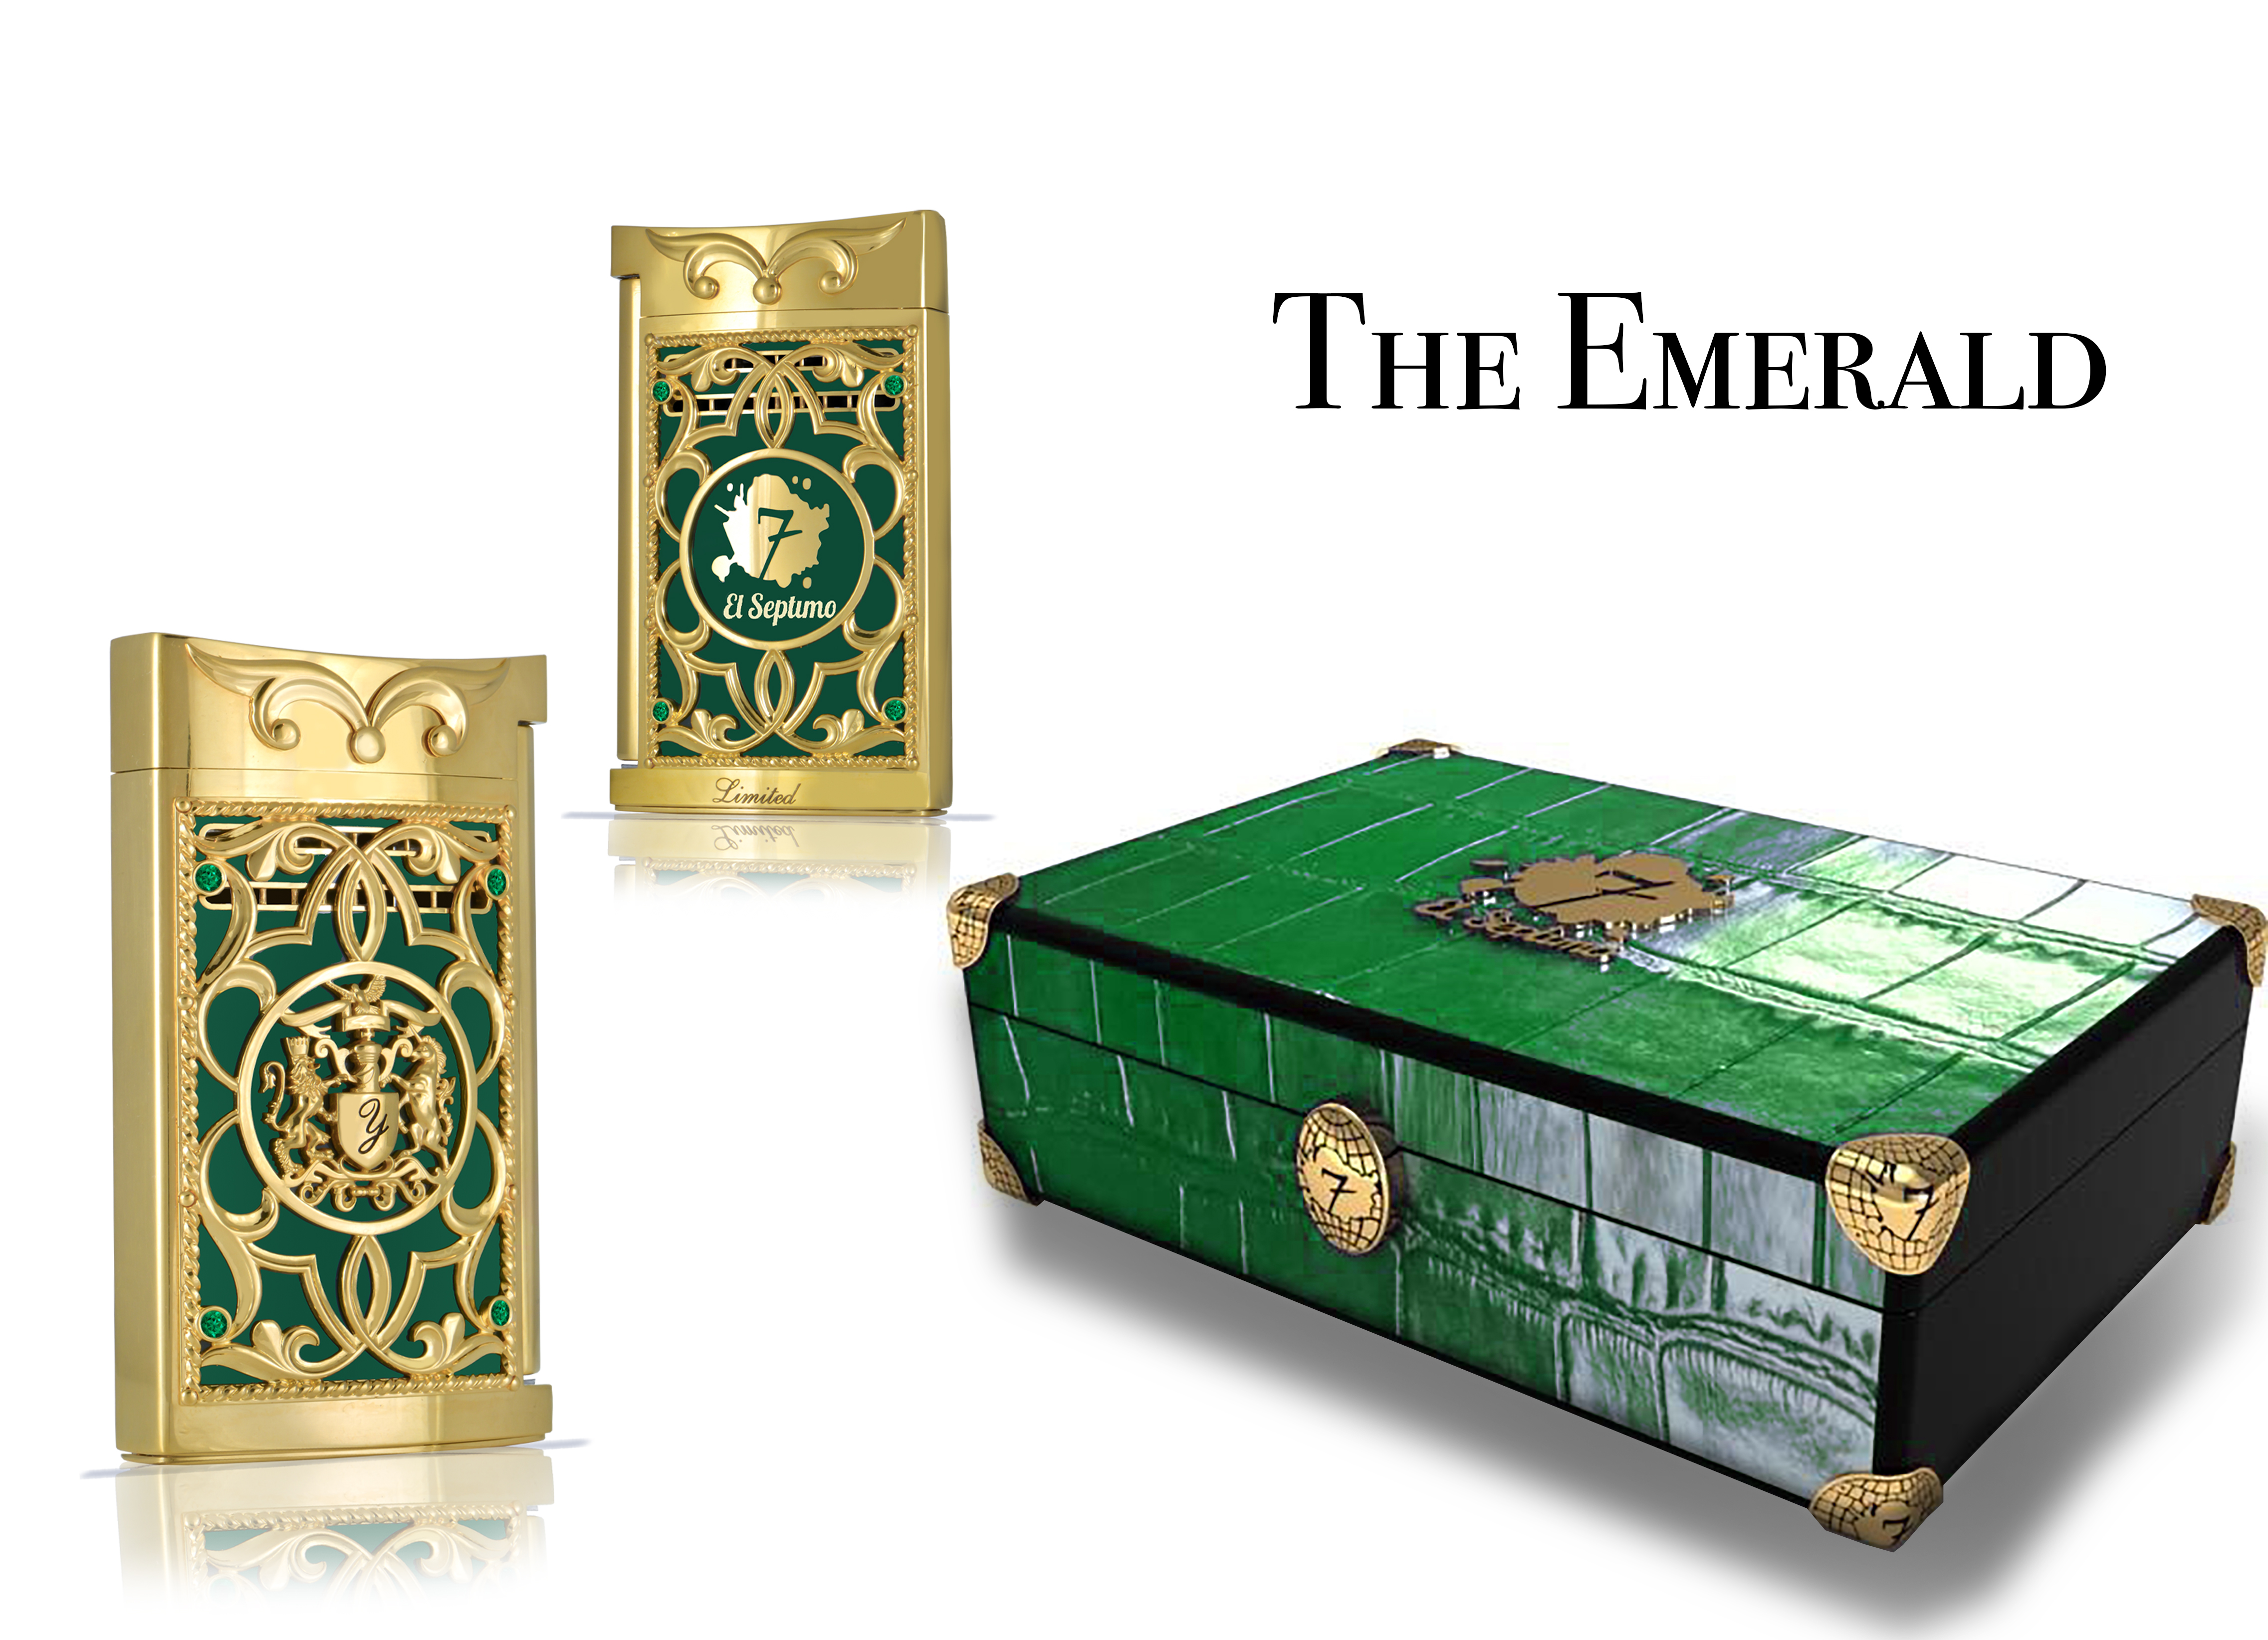 Lighters come in a beautifully-made custom crocodile travel case that matches its stone and is decorated with gold hardware and embellishments.